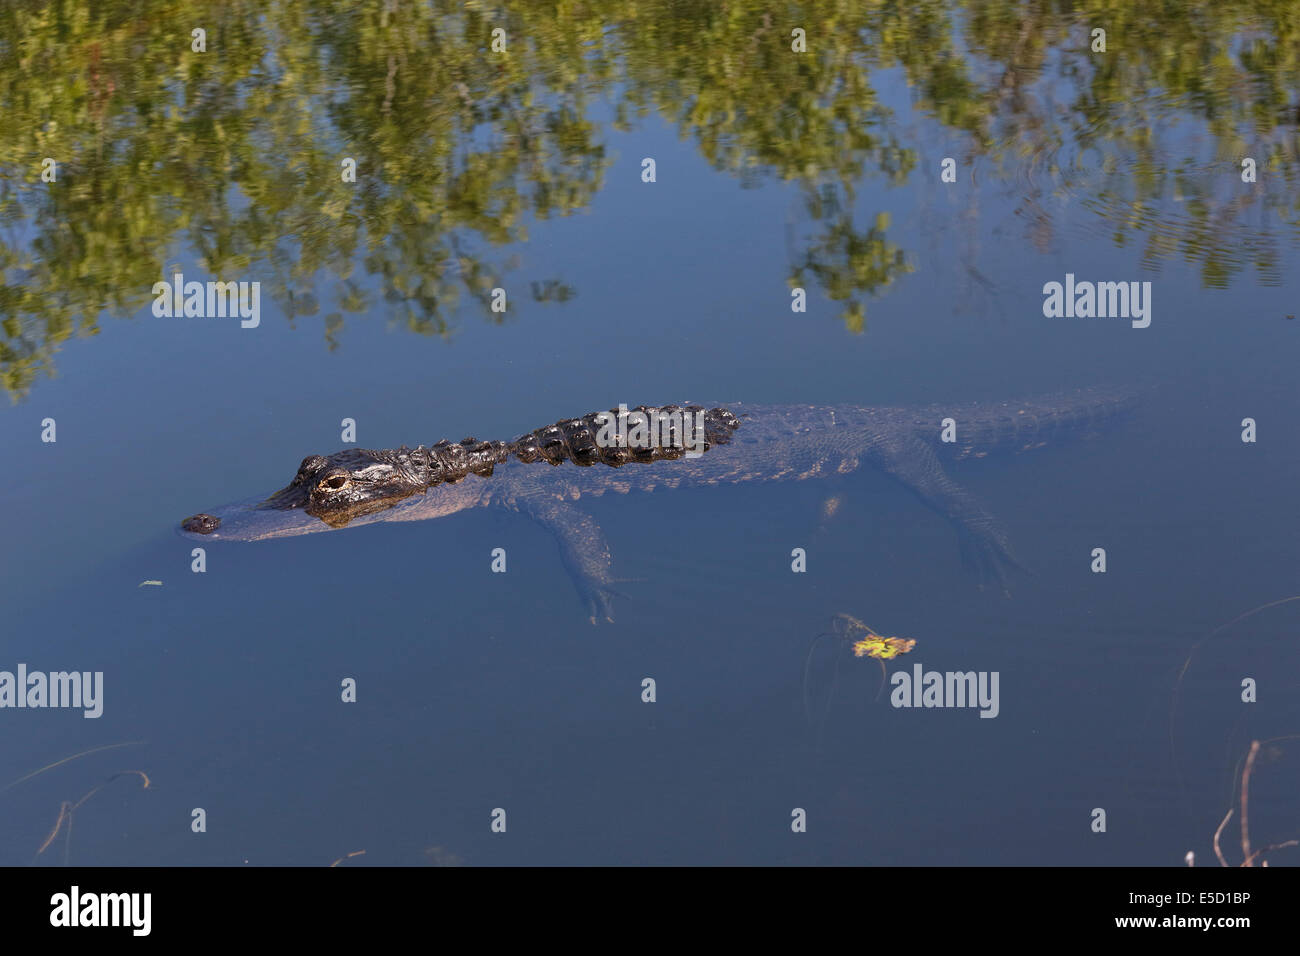 American Alligator (Alligator mississippiensis) swimming in clear water Stock Photo